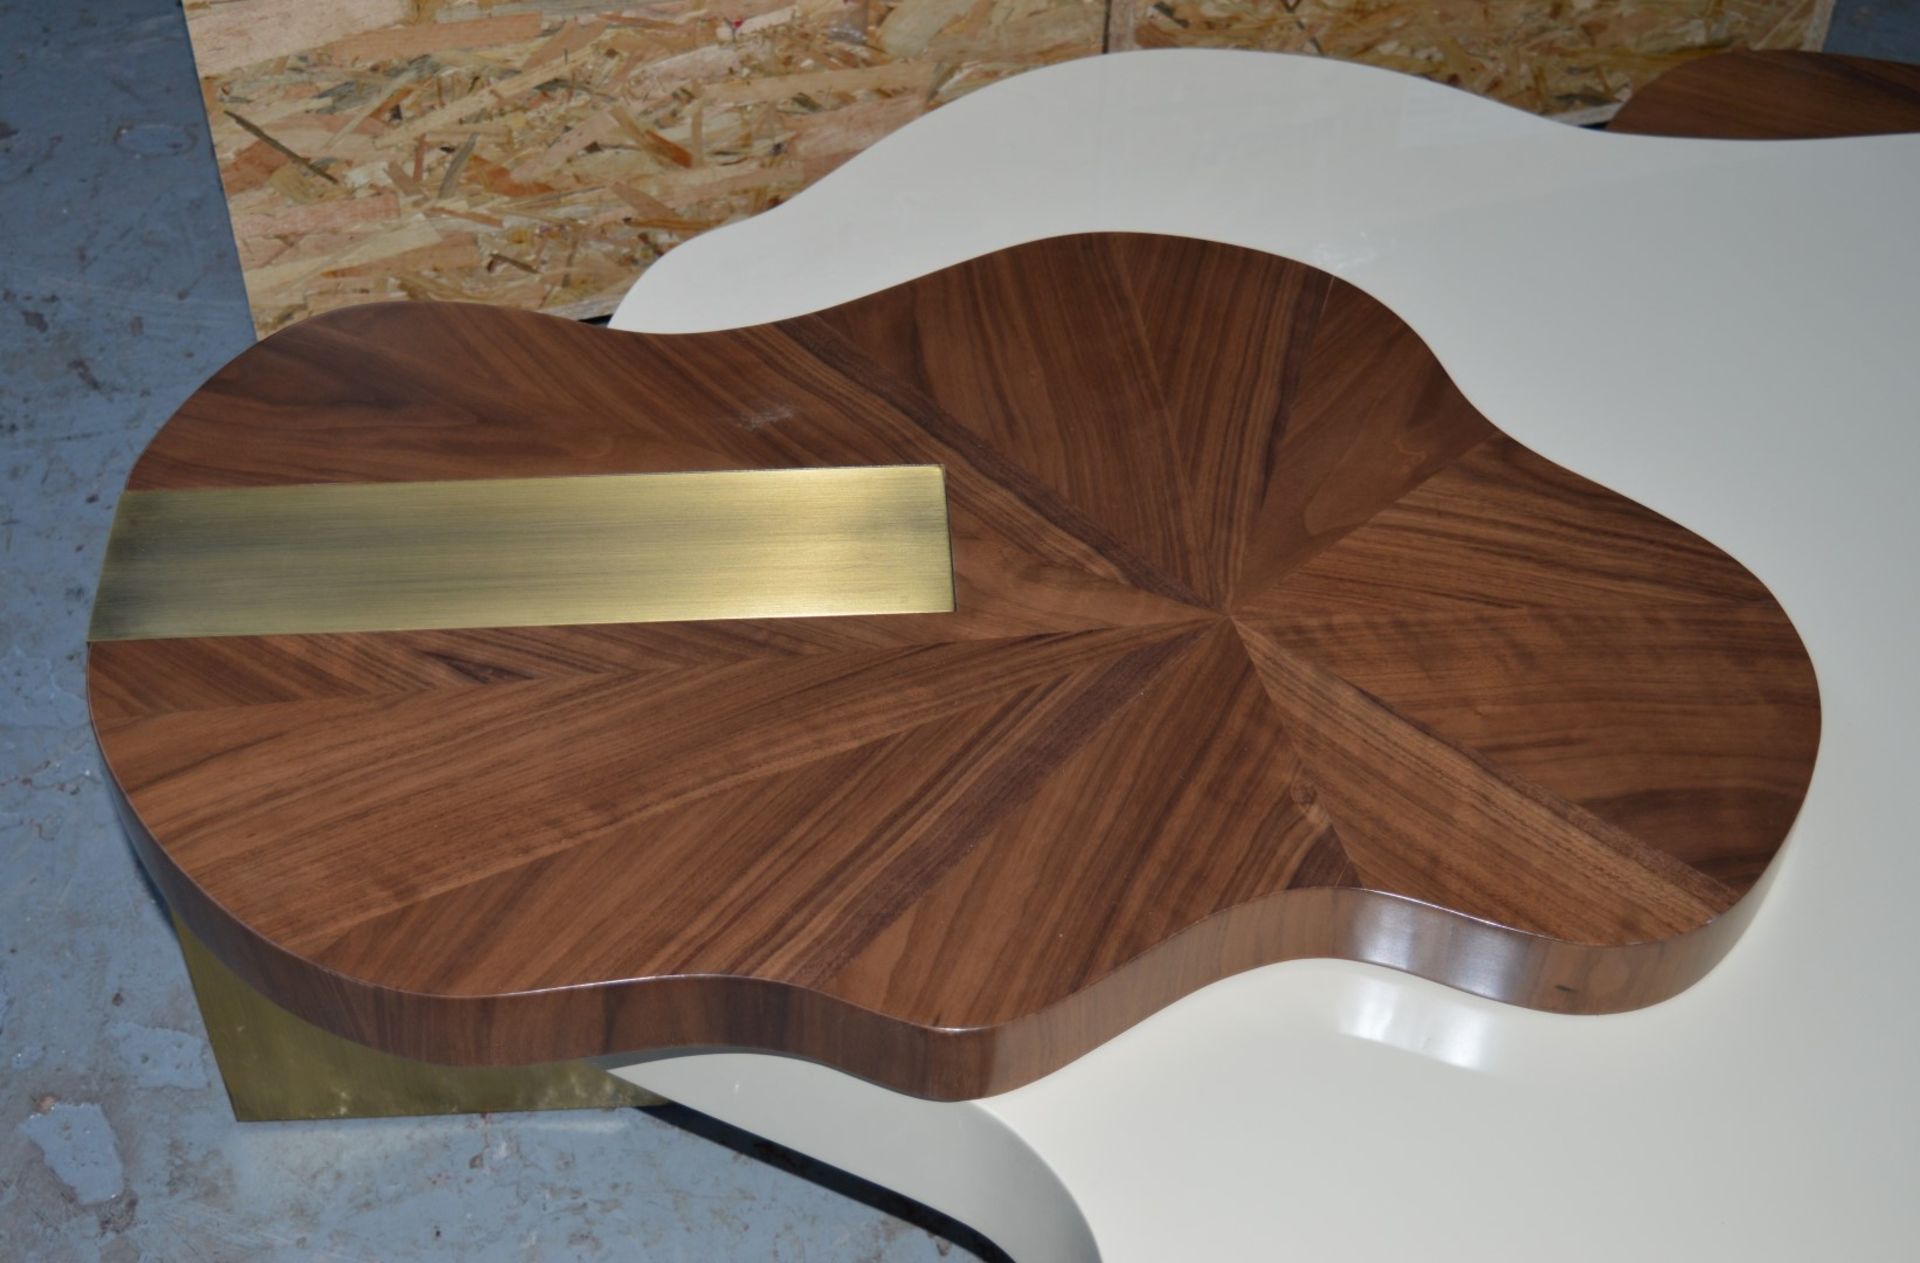 1 x Ginger & Jagger Nenhuphar Coffee Table - Urbanmint Design - Eye Catching Design - Walnut and - Image 8 of 15